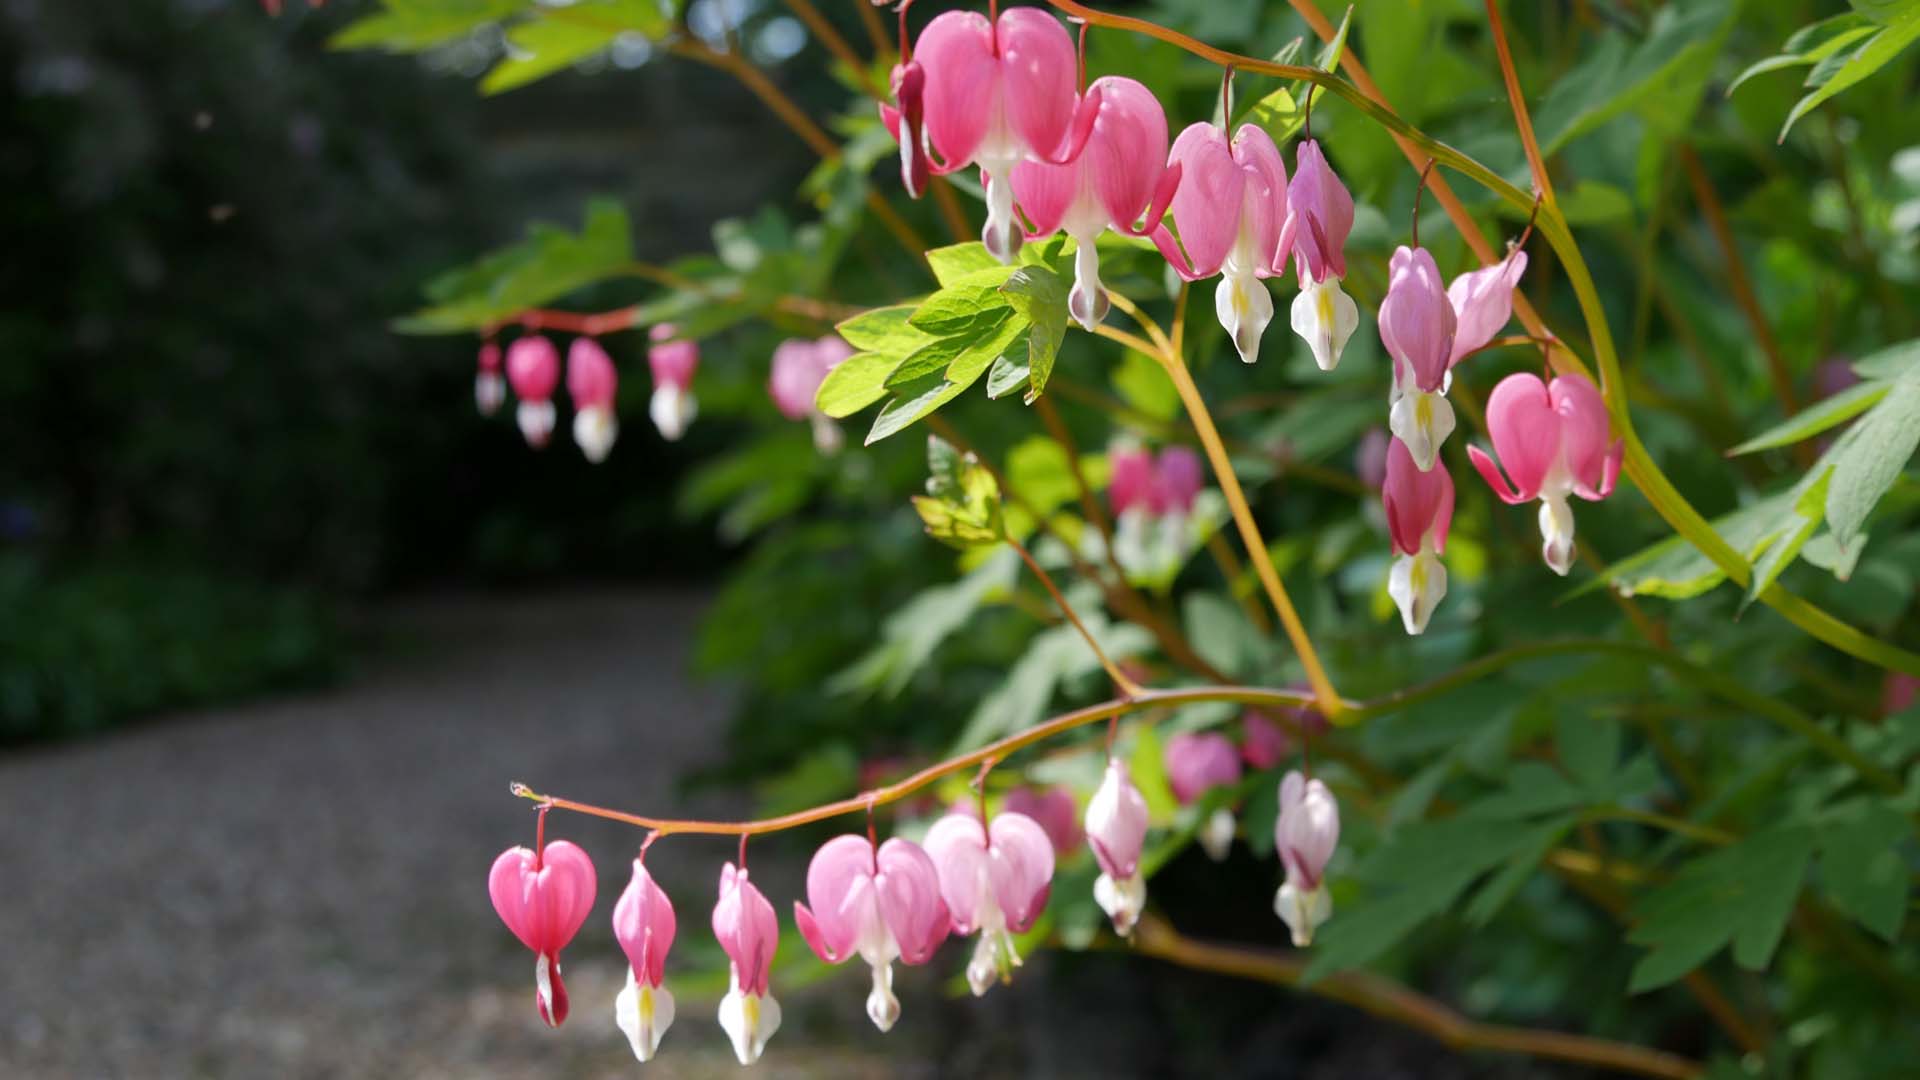 Dicentra spectabilis 'Bleeding hearts' like this can be tempting, but young plants need care.